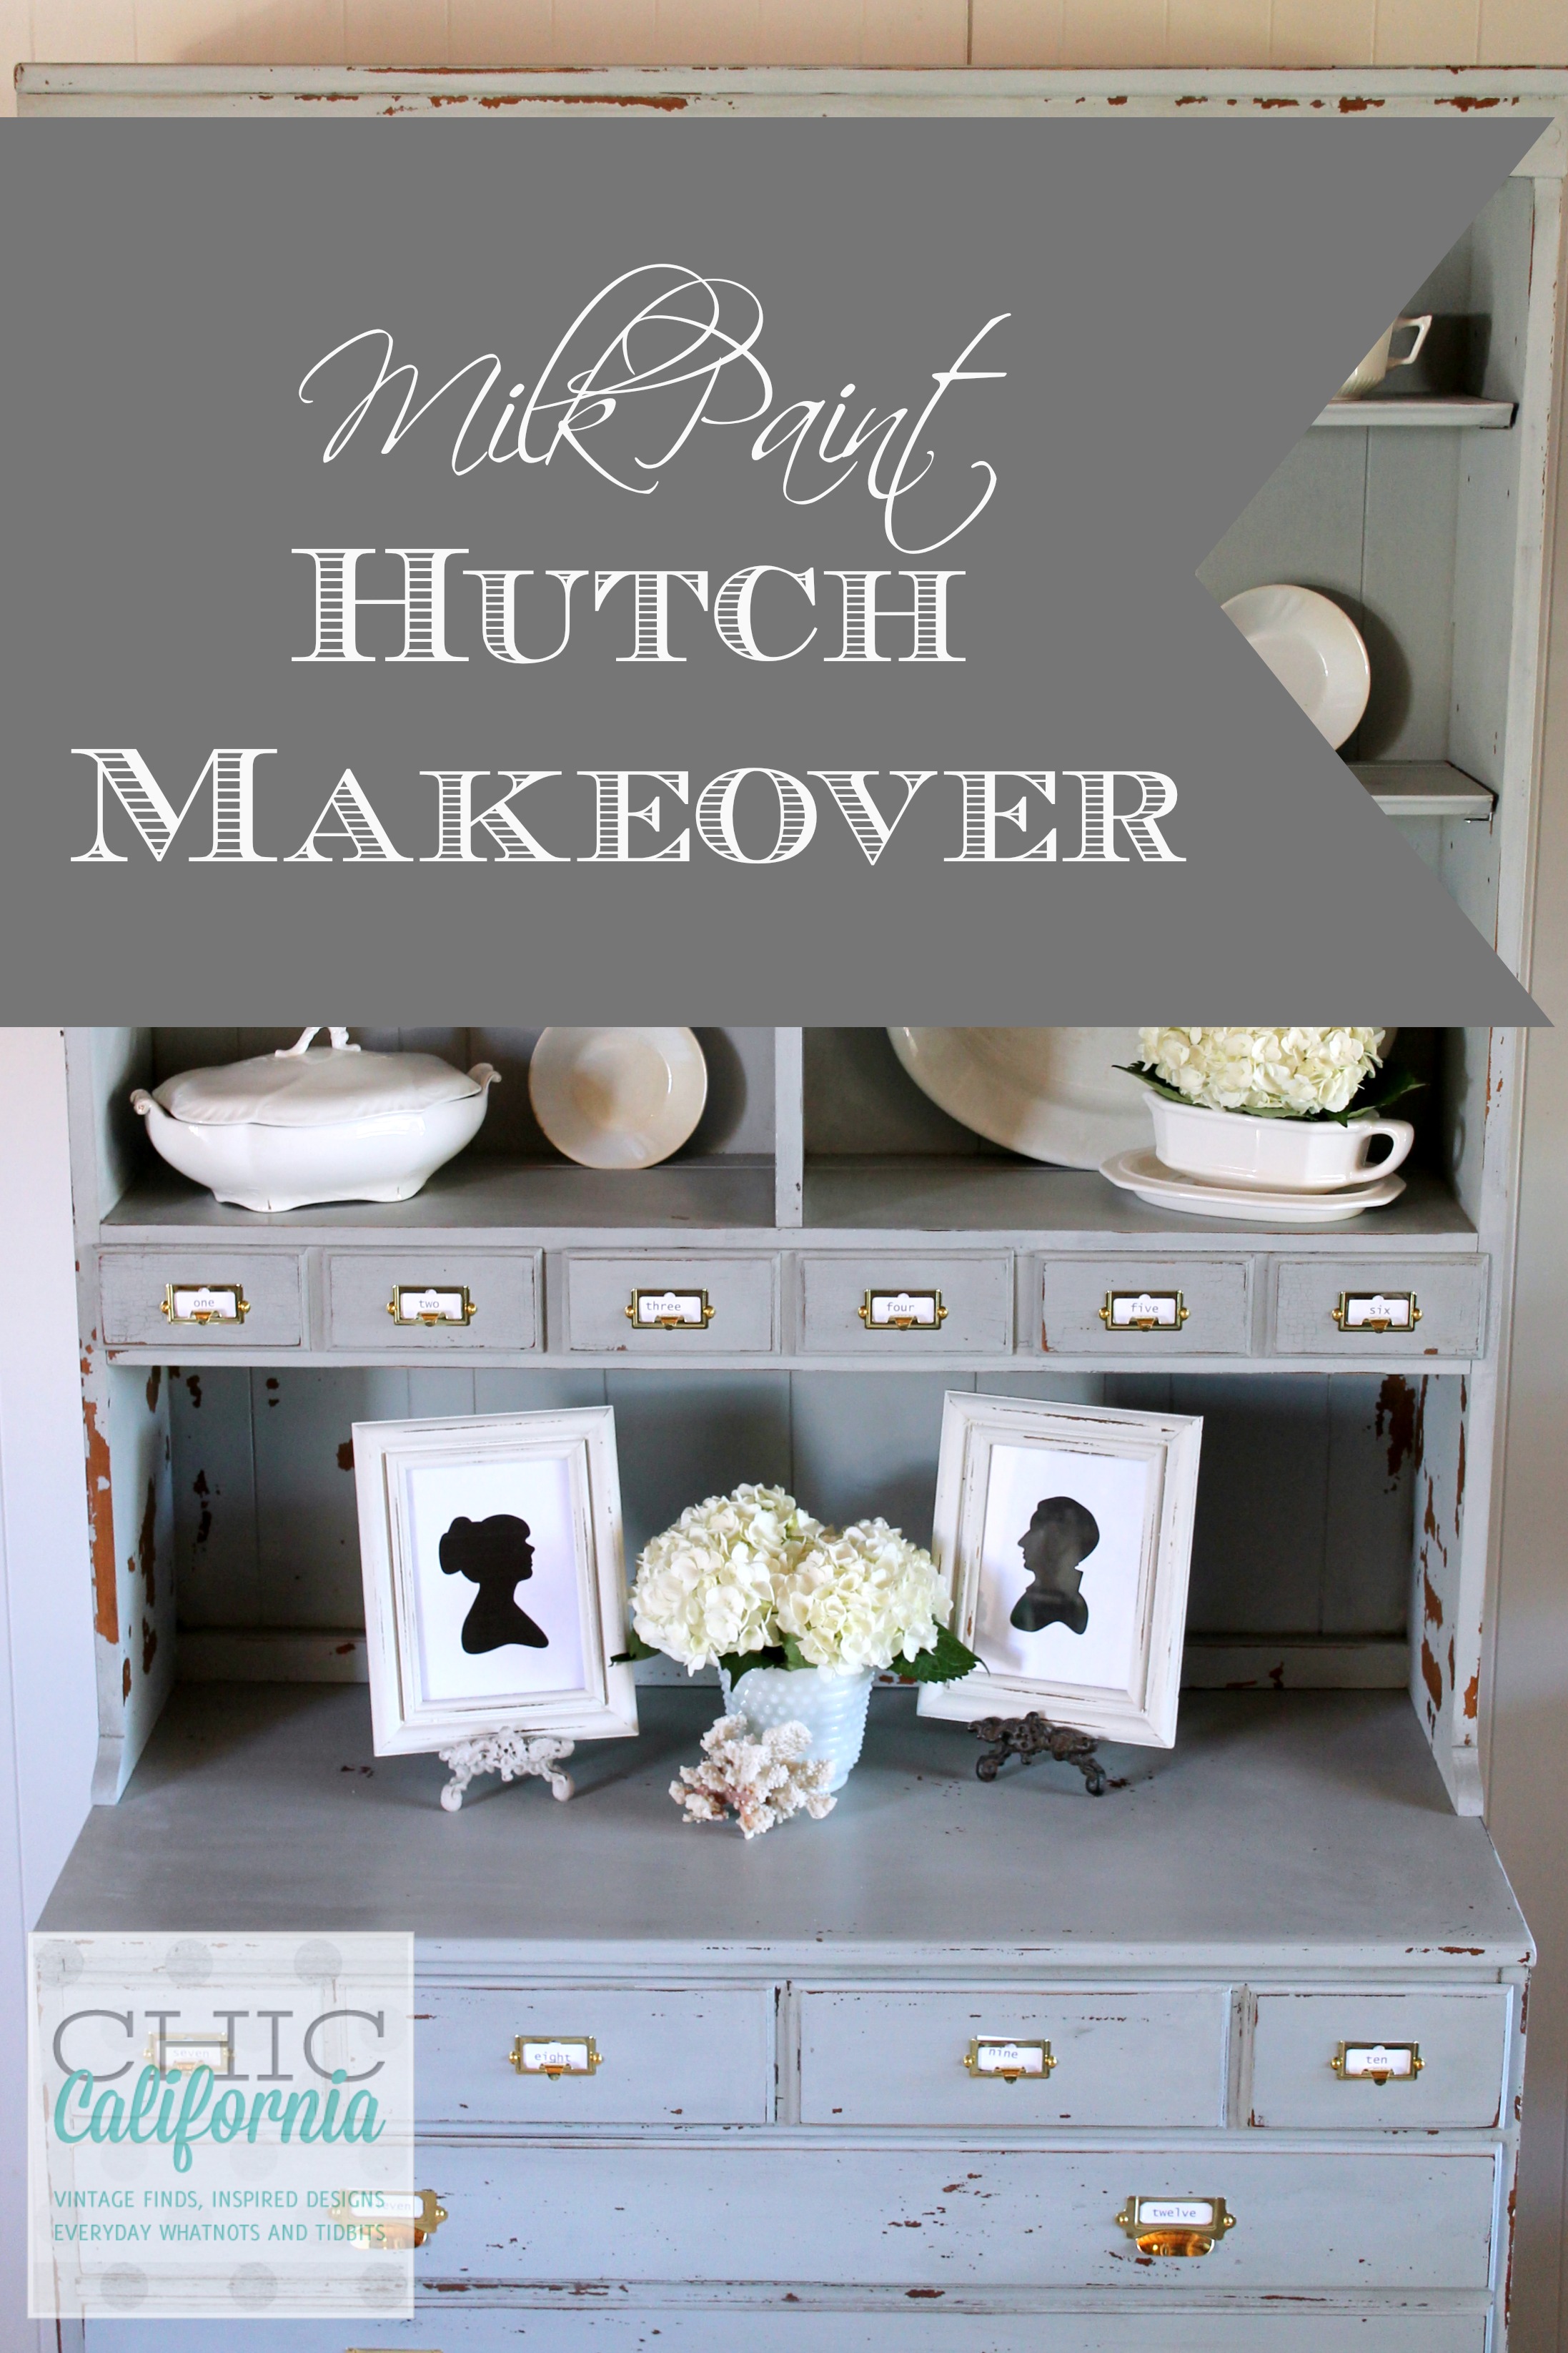 Milk Paint Hutch Makeover by Chic California